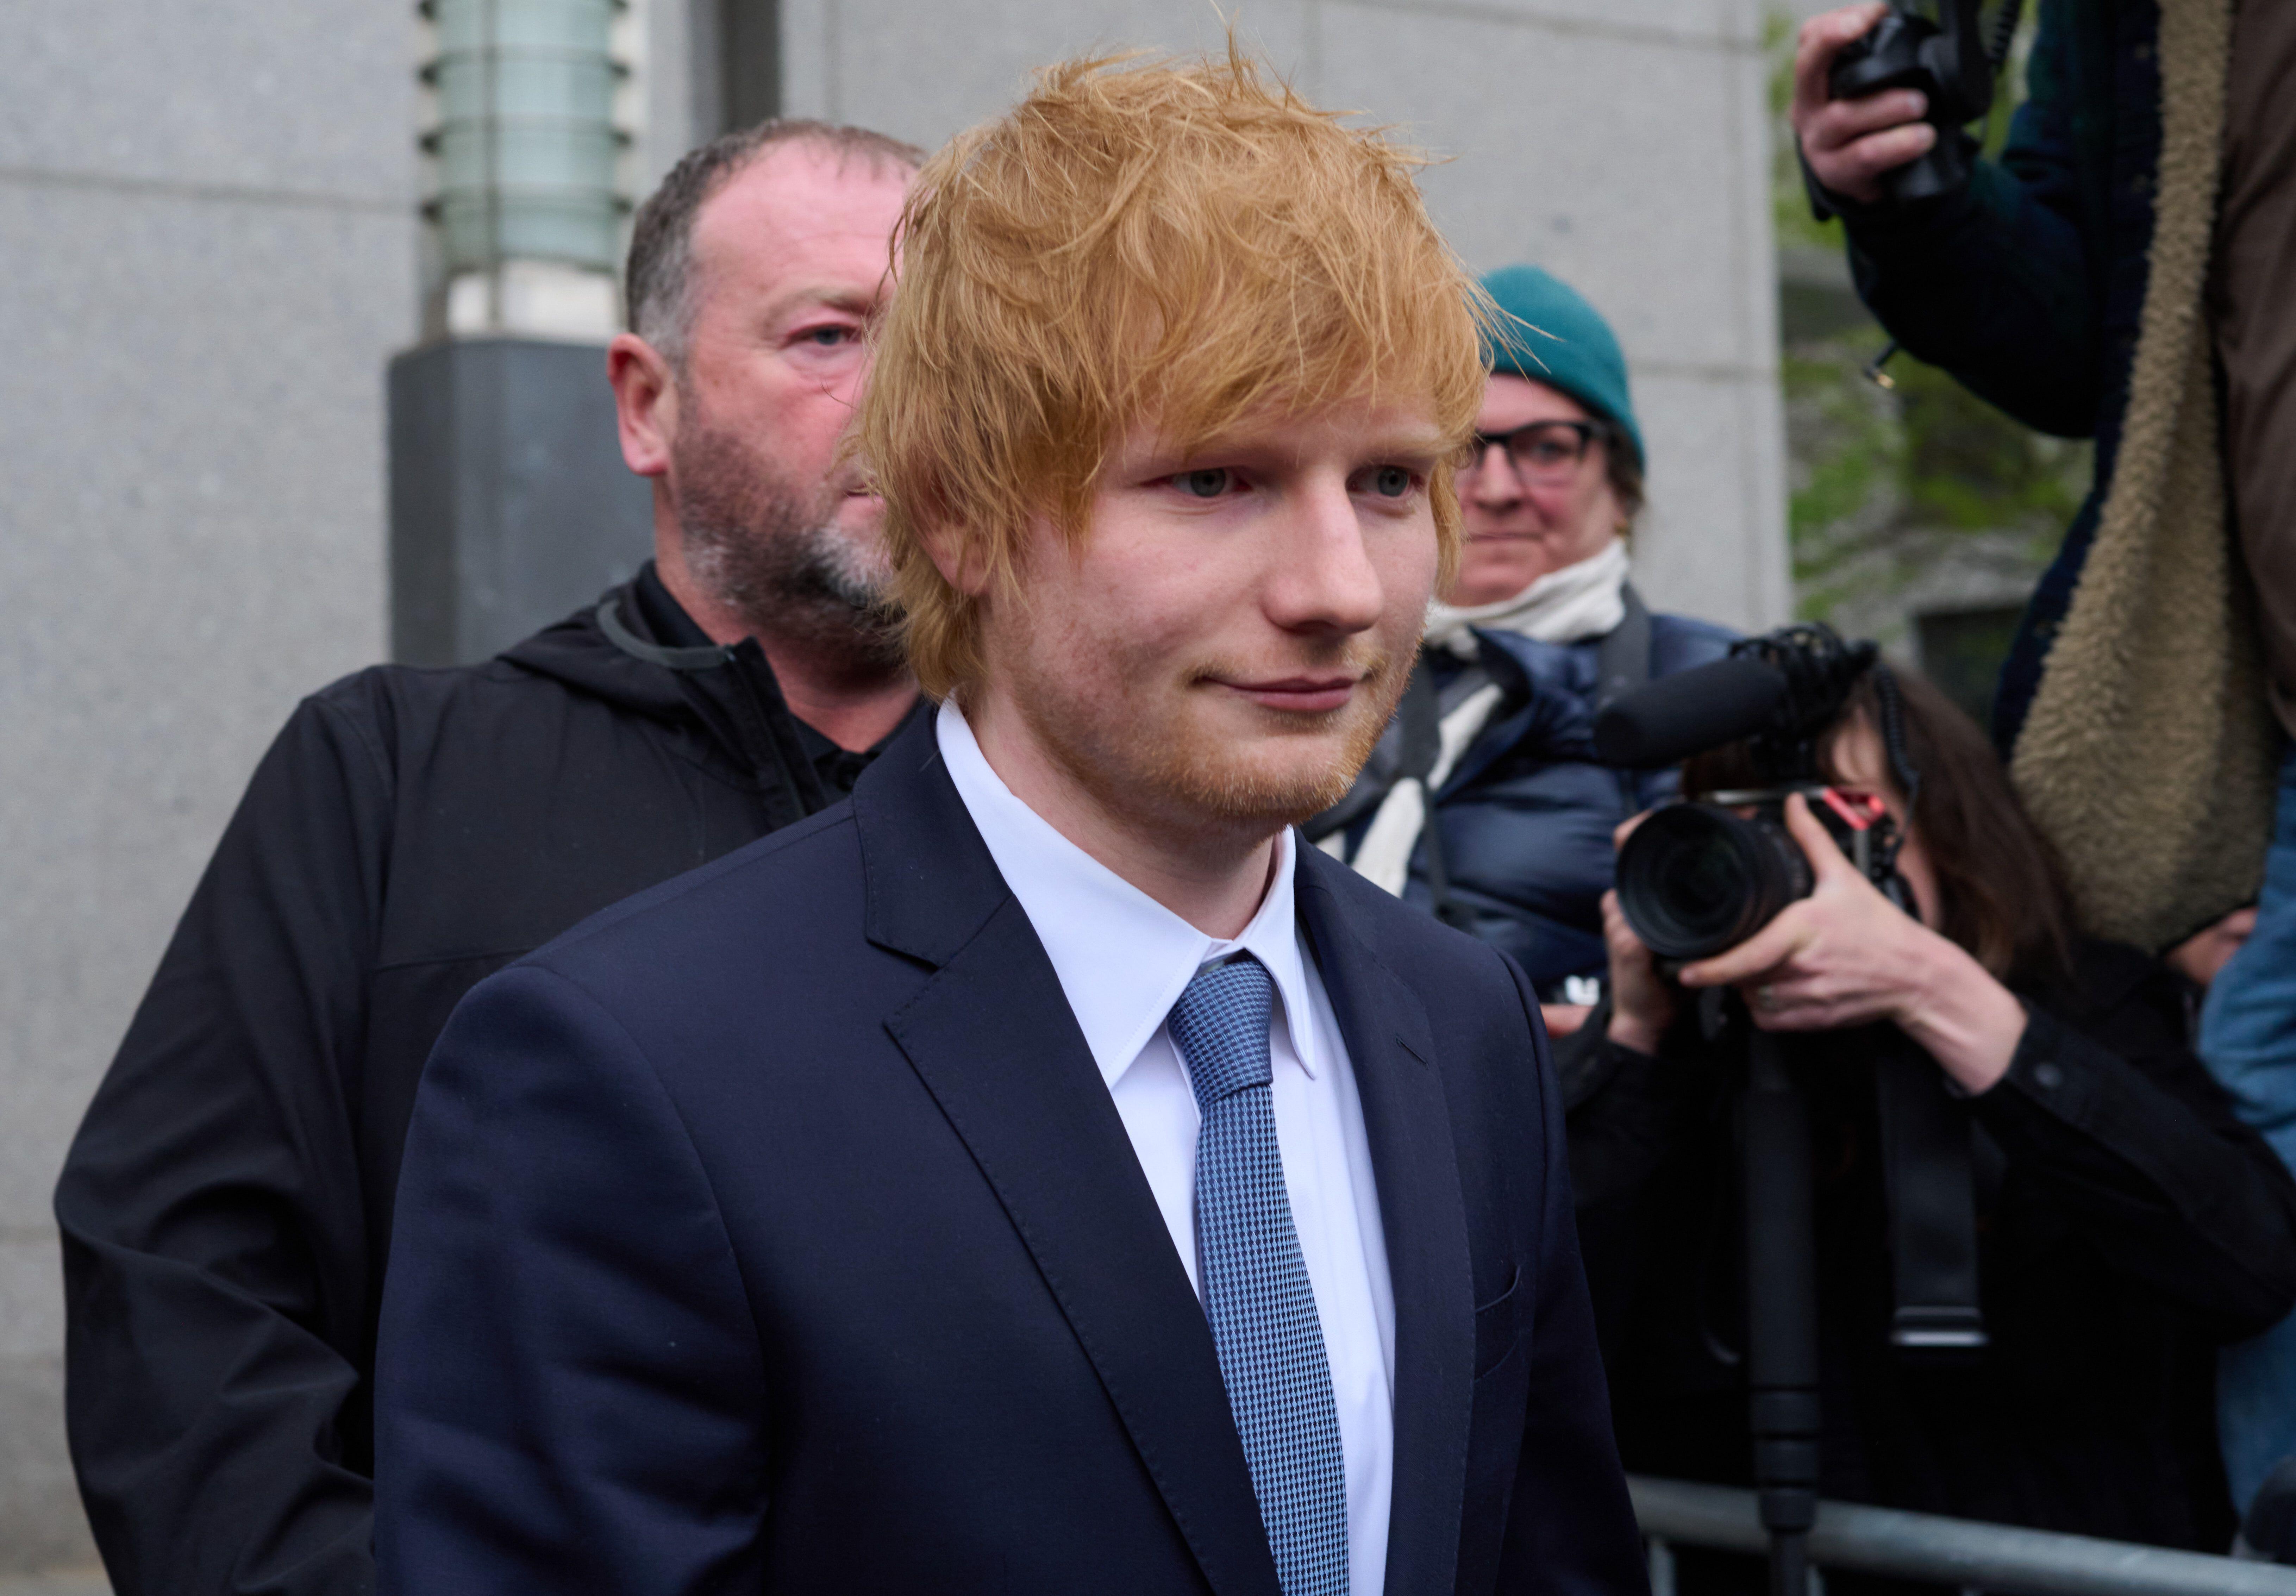 Ed Sheeran Celebrates Trial Win With Surprise NY Performance - Watch